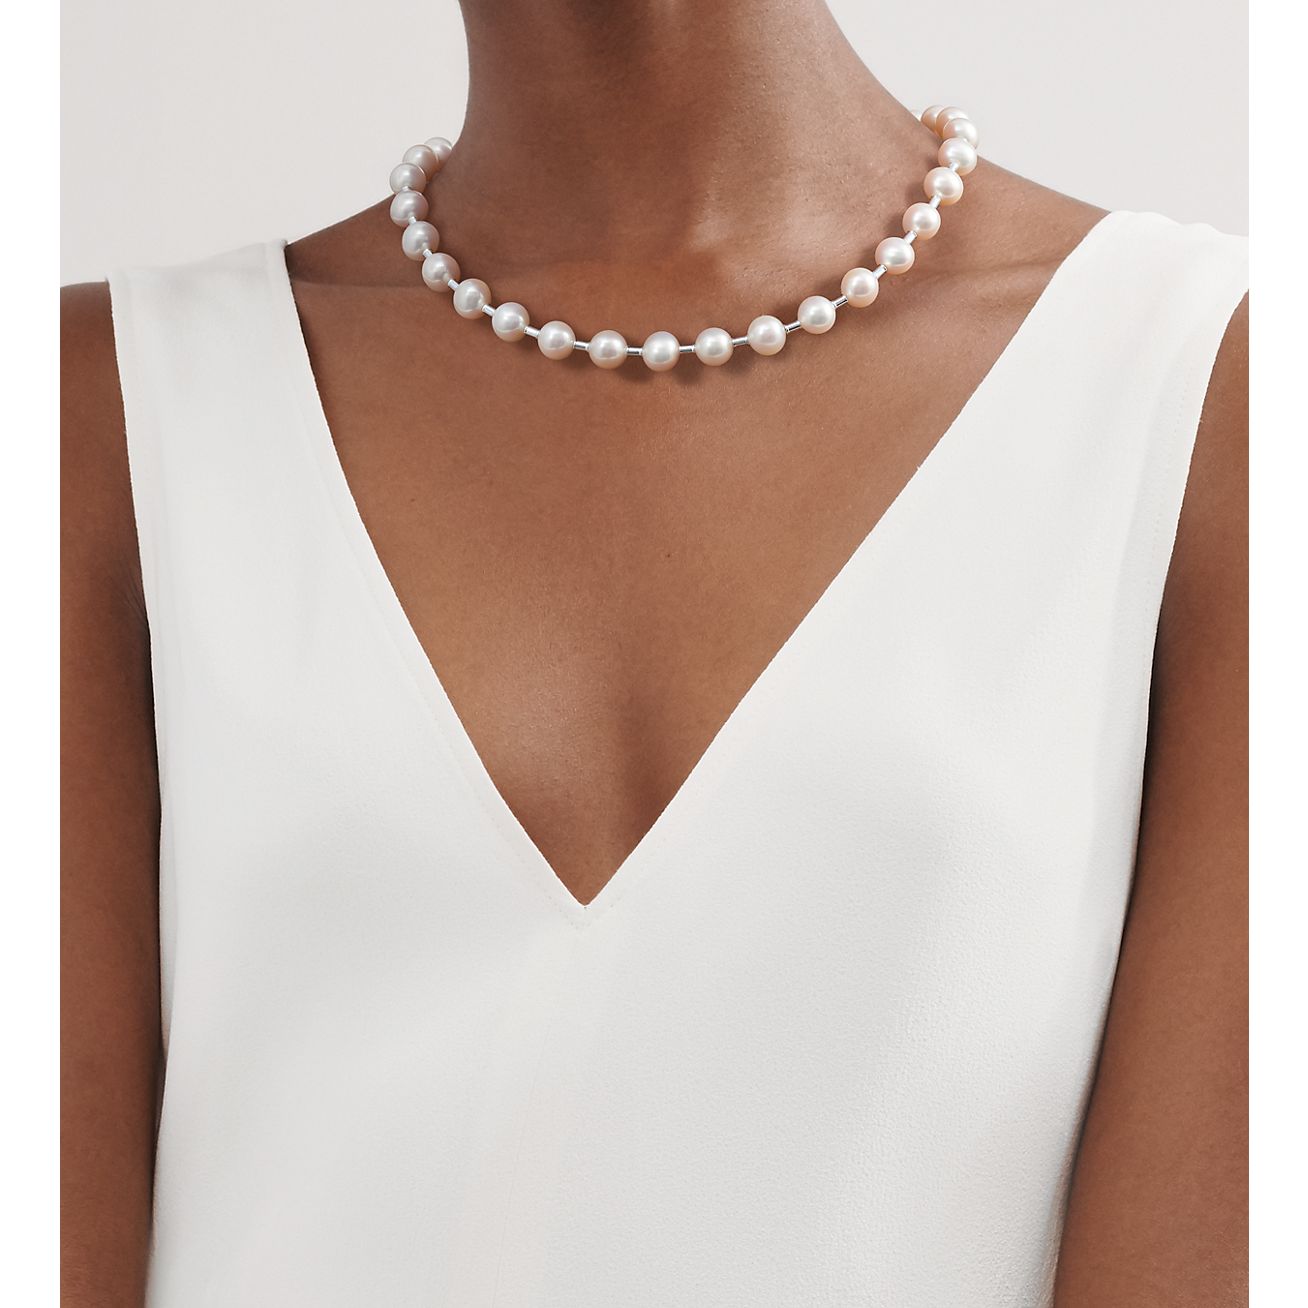 tiffany & co pearl necklace